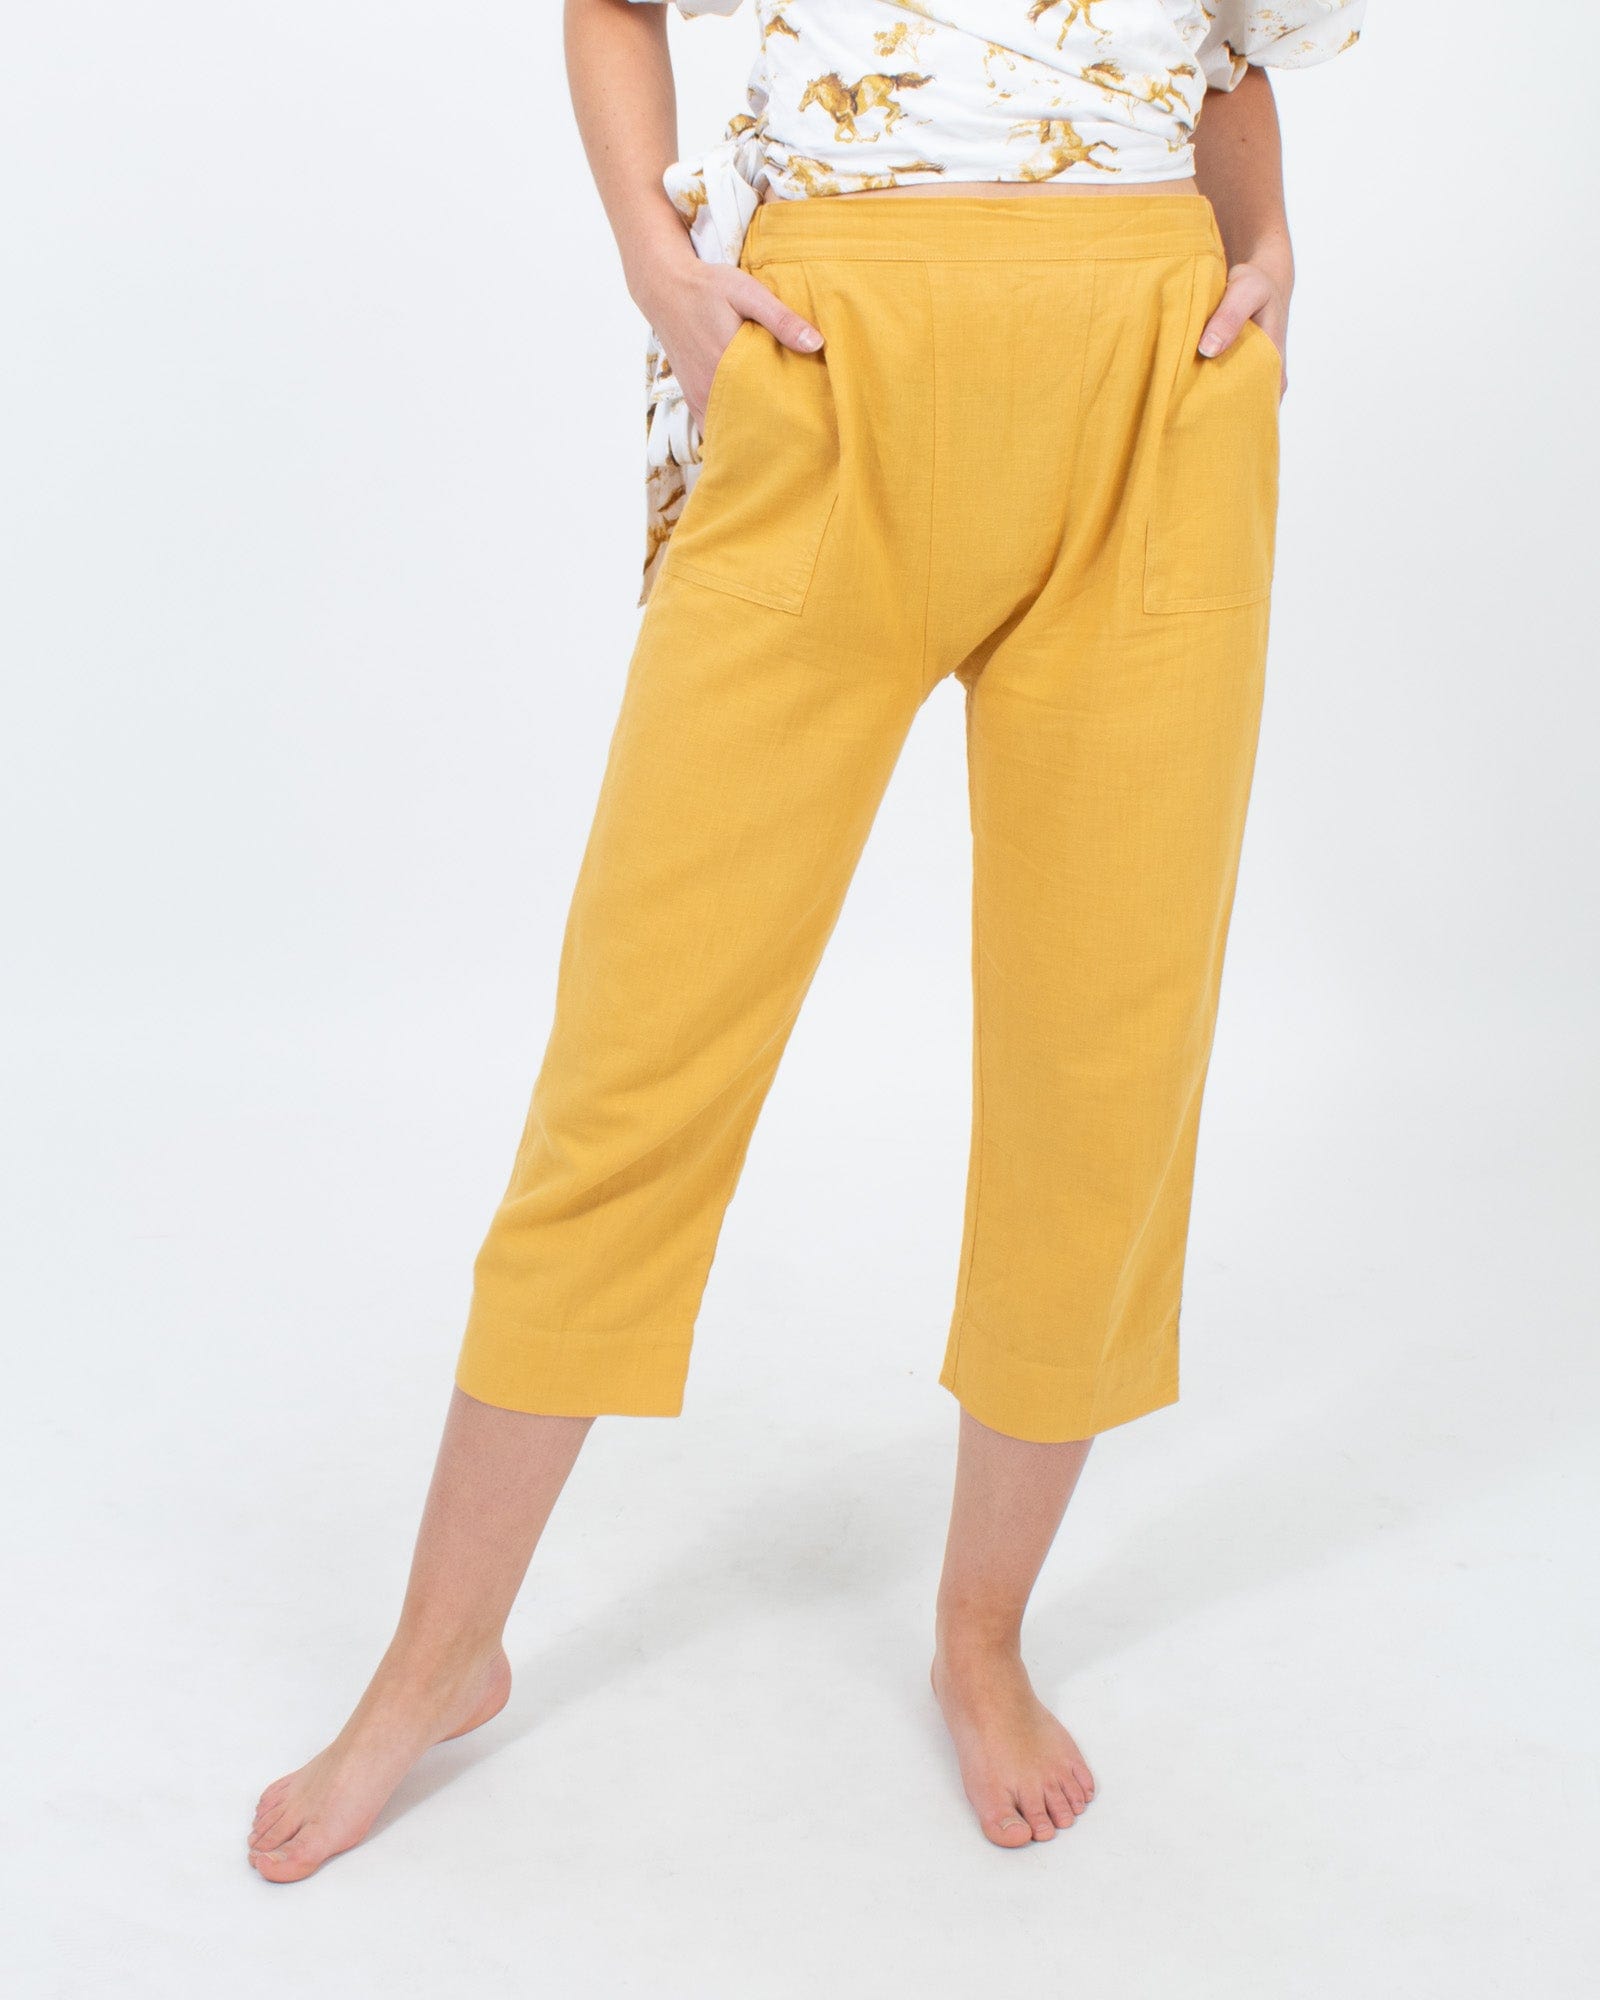 Order Yellow High waist Pants Online for Women at Best Price